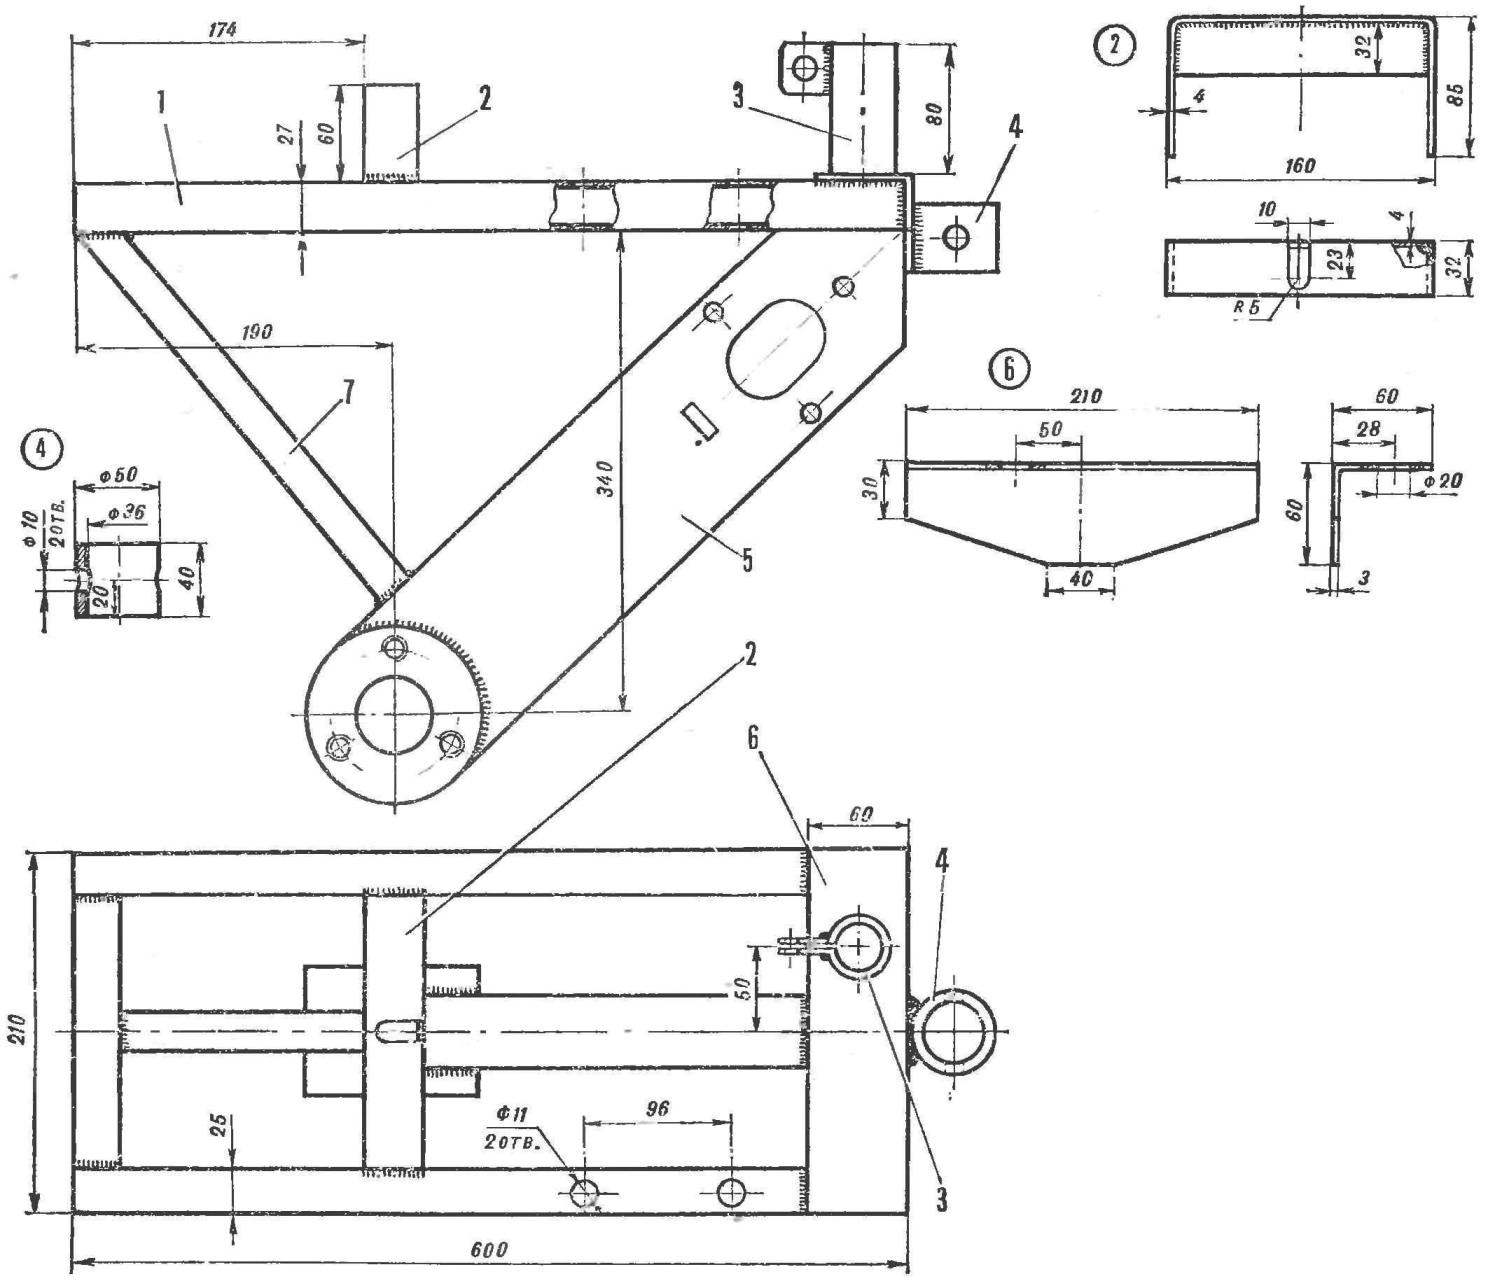 Fig. 2. The frame of the cultivator Assembly